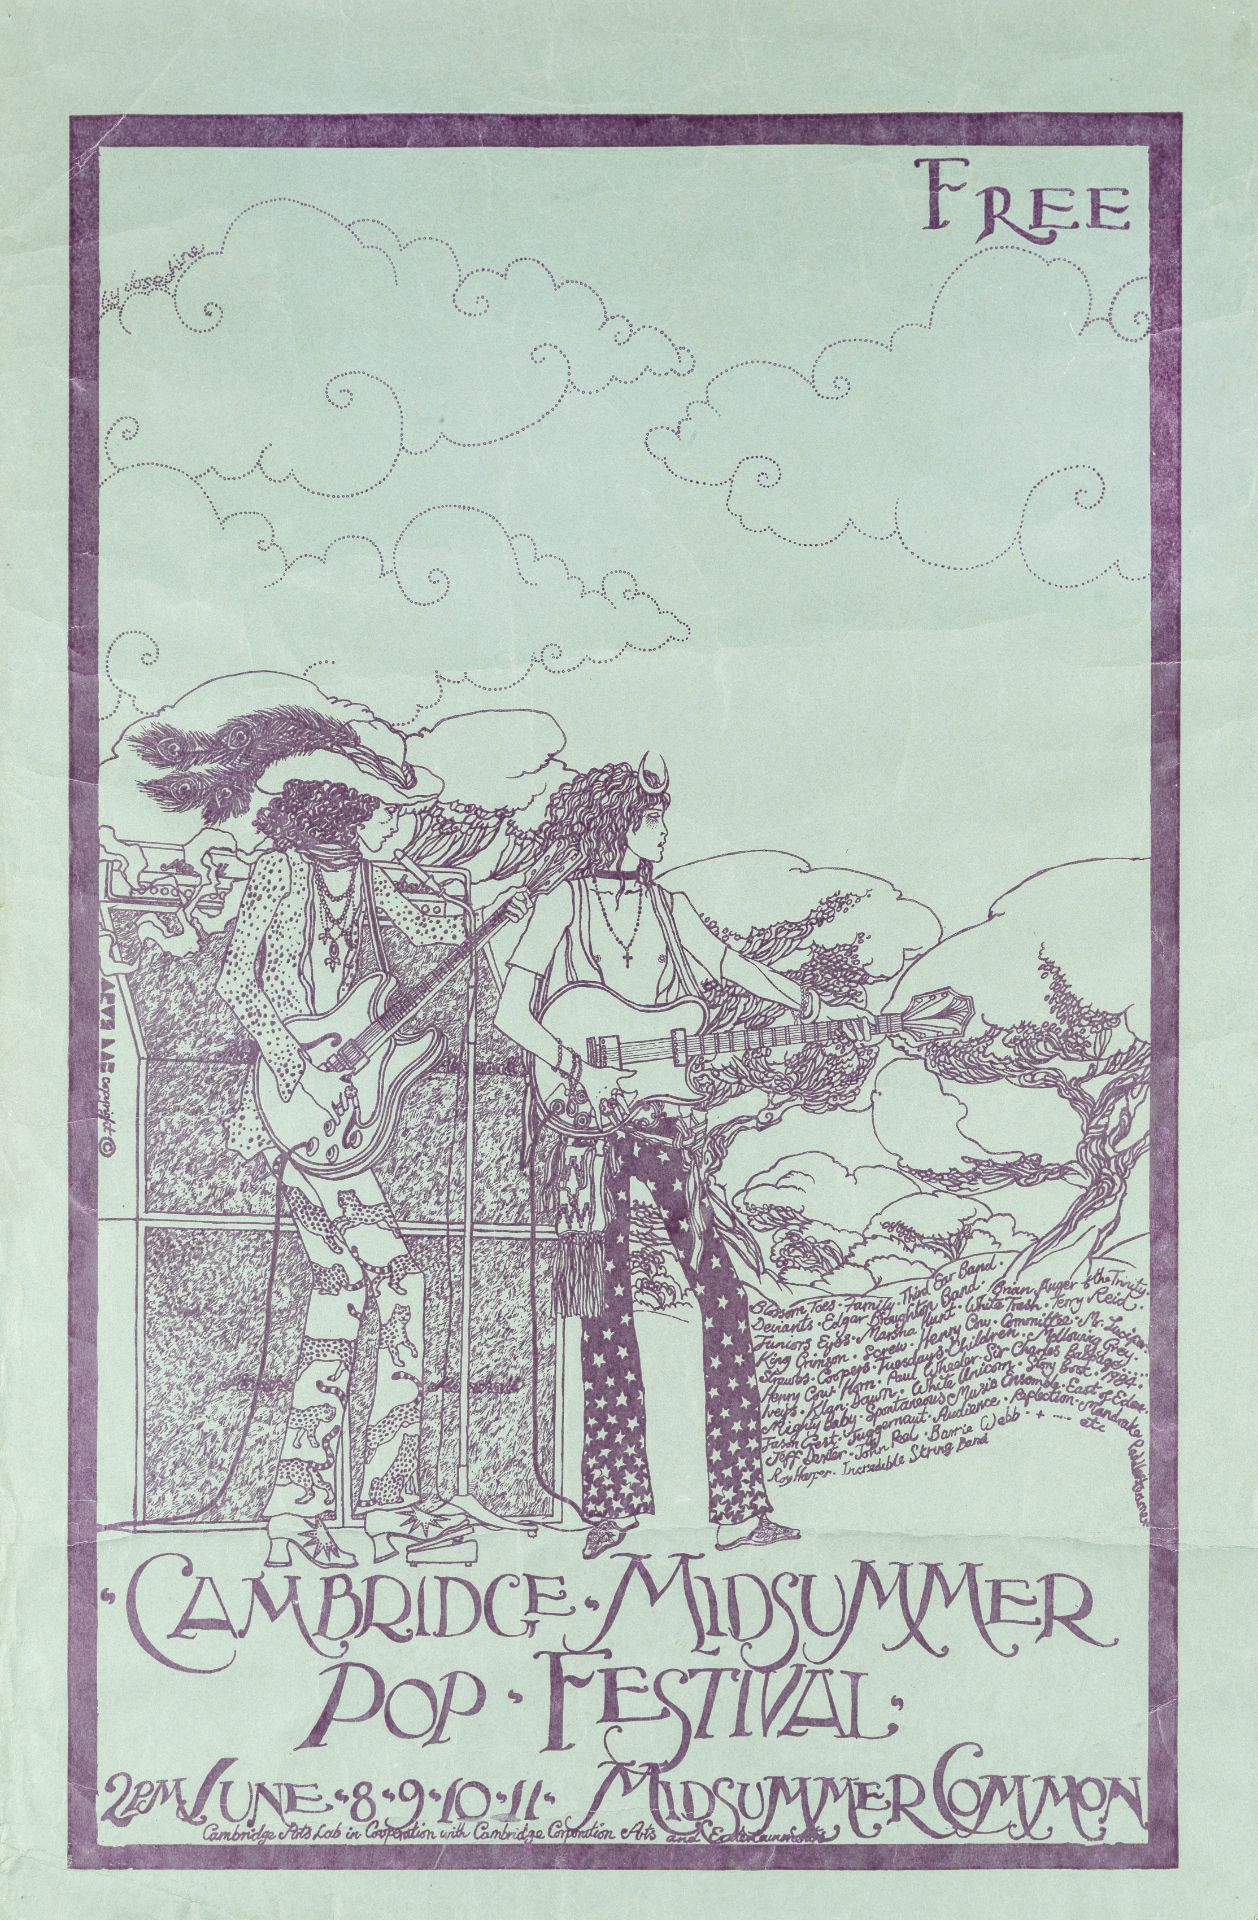 David Bowie: A Scarce Poster For The Free Cambridge Midsummer Pop Festival, 8th-11th June, 1969, 2